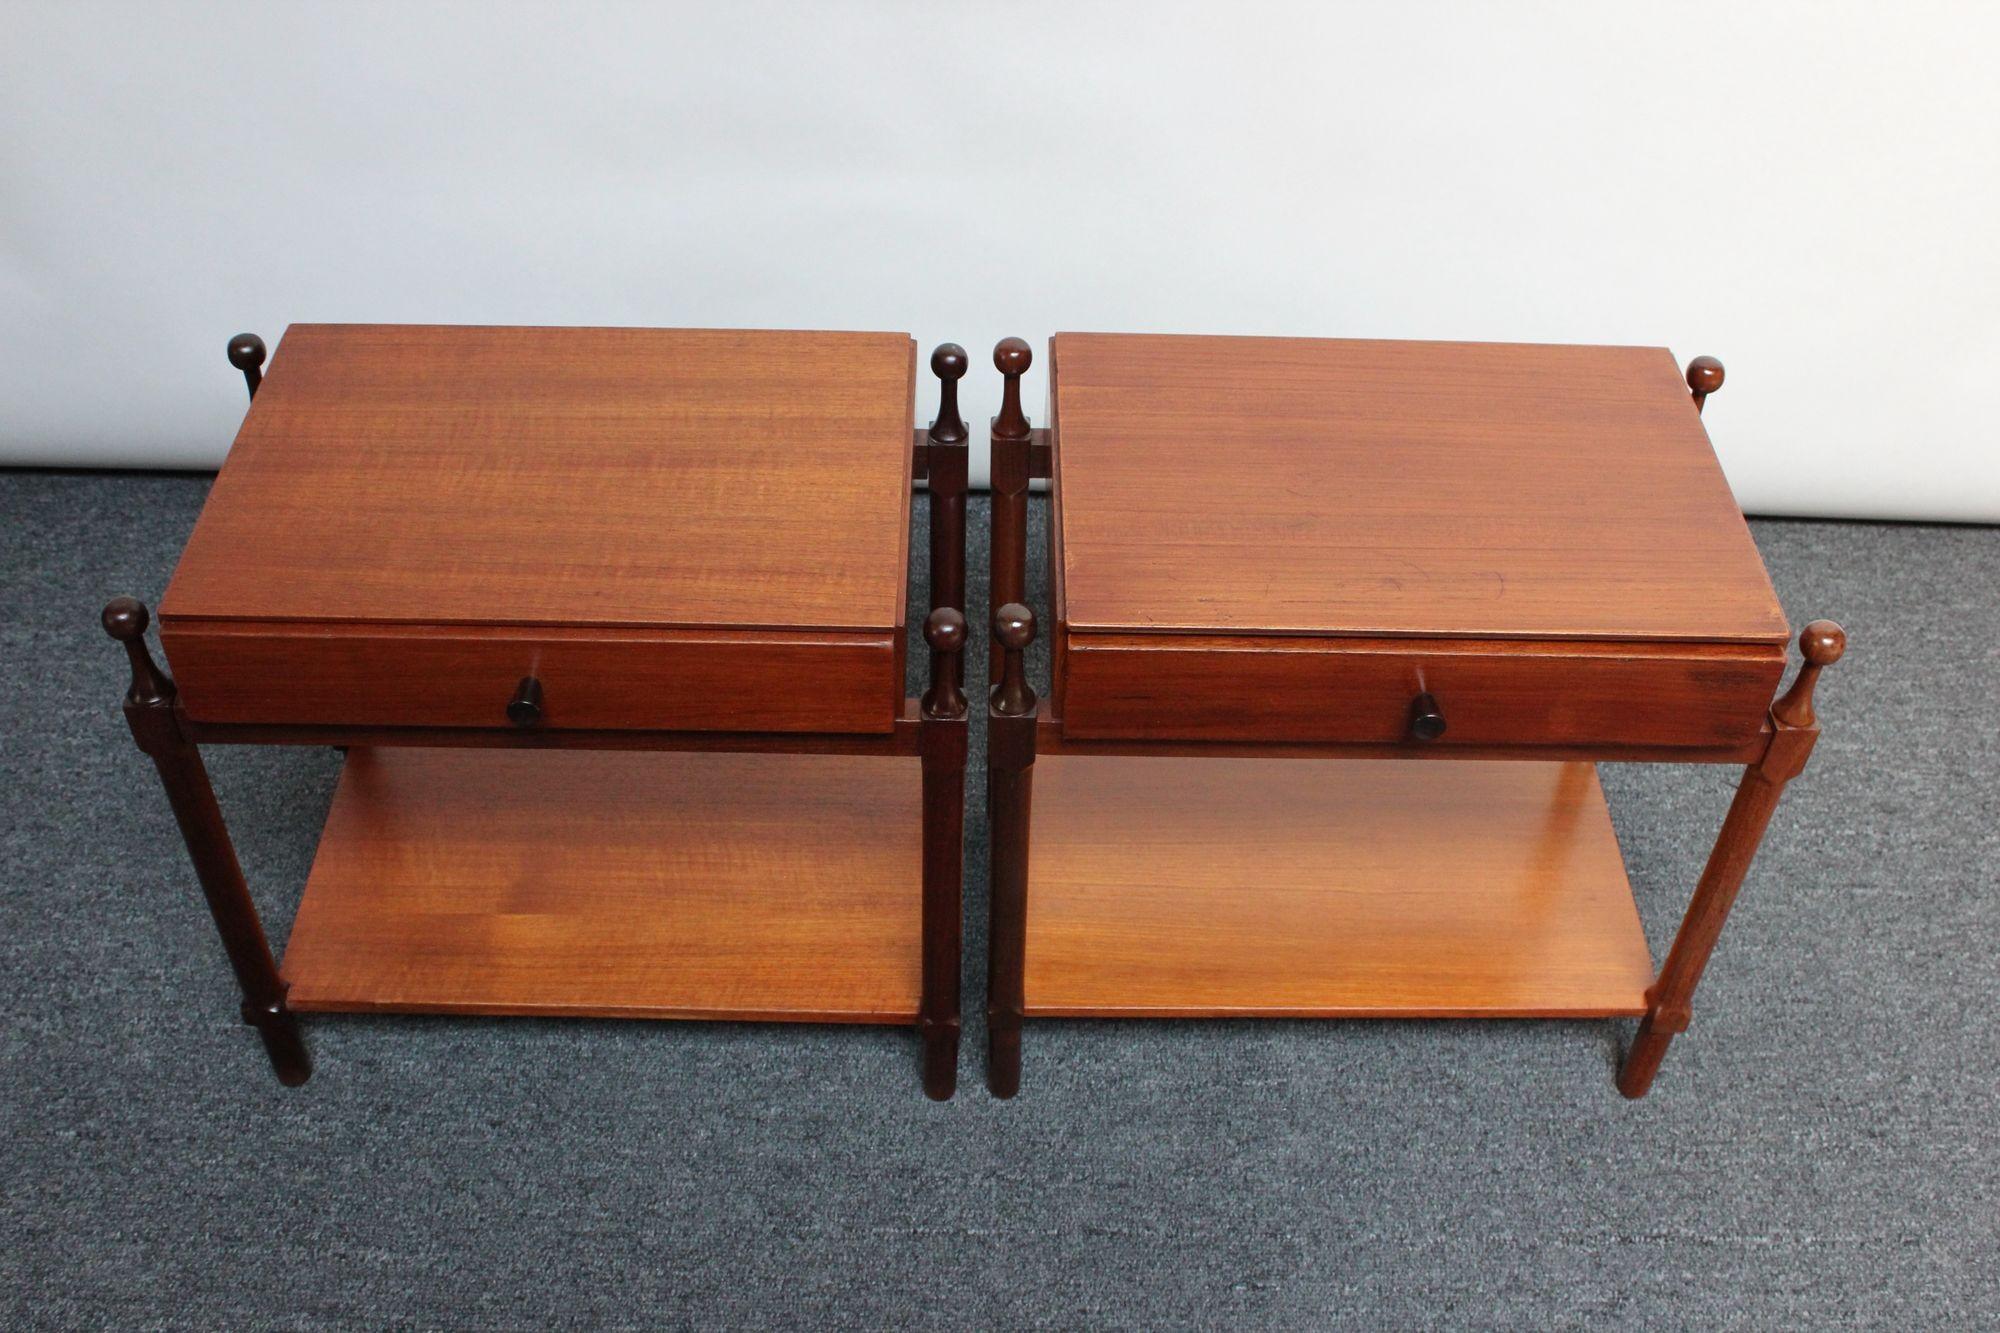 Pair of bedside tables / nightstands designed and manufactured by FP Fratelli Proserpio (1950s, Meda, Italy).
Small scale, though designed to maximize storage capability with a single drawer and lower bottom tier surface.
Teak frames are adorned